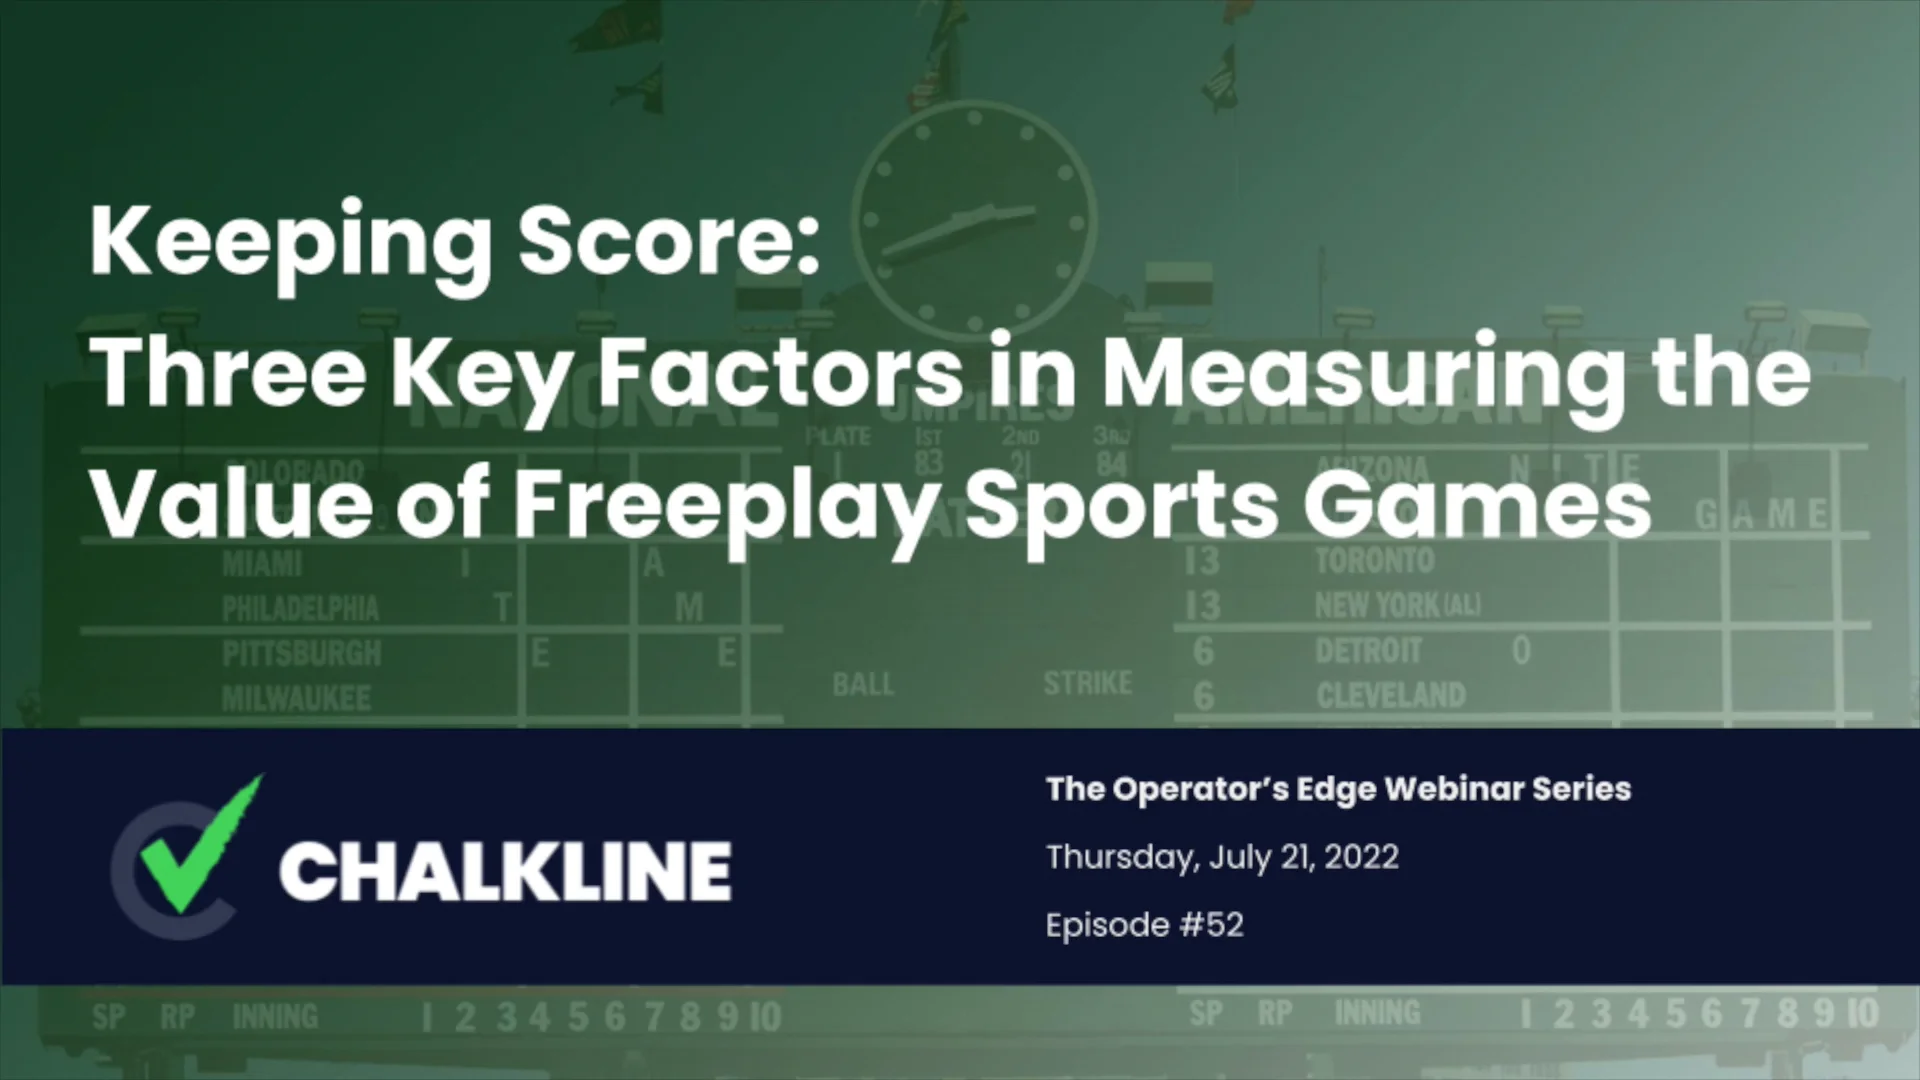 Build your Loyalty Database with Freeplay Sports Games